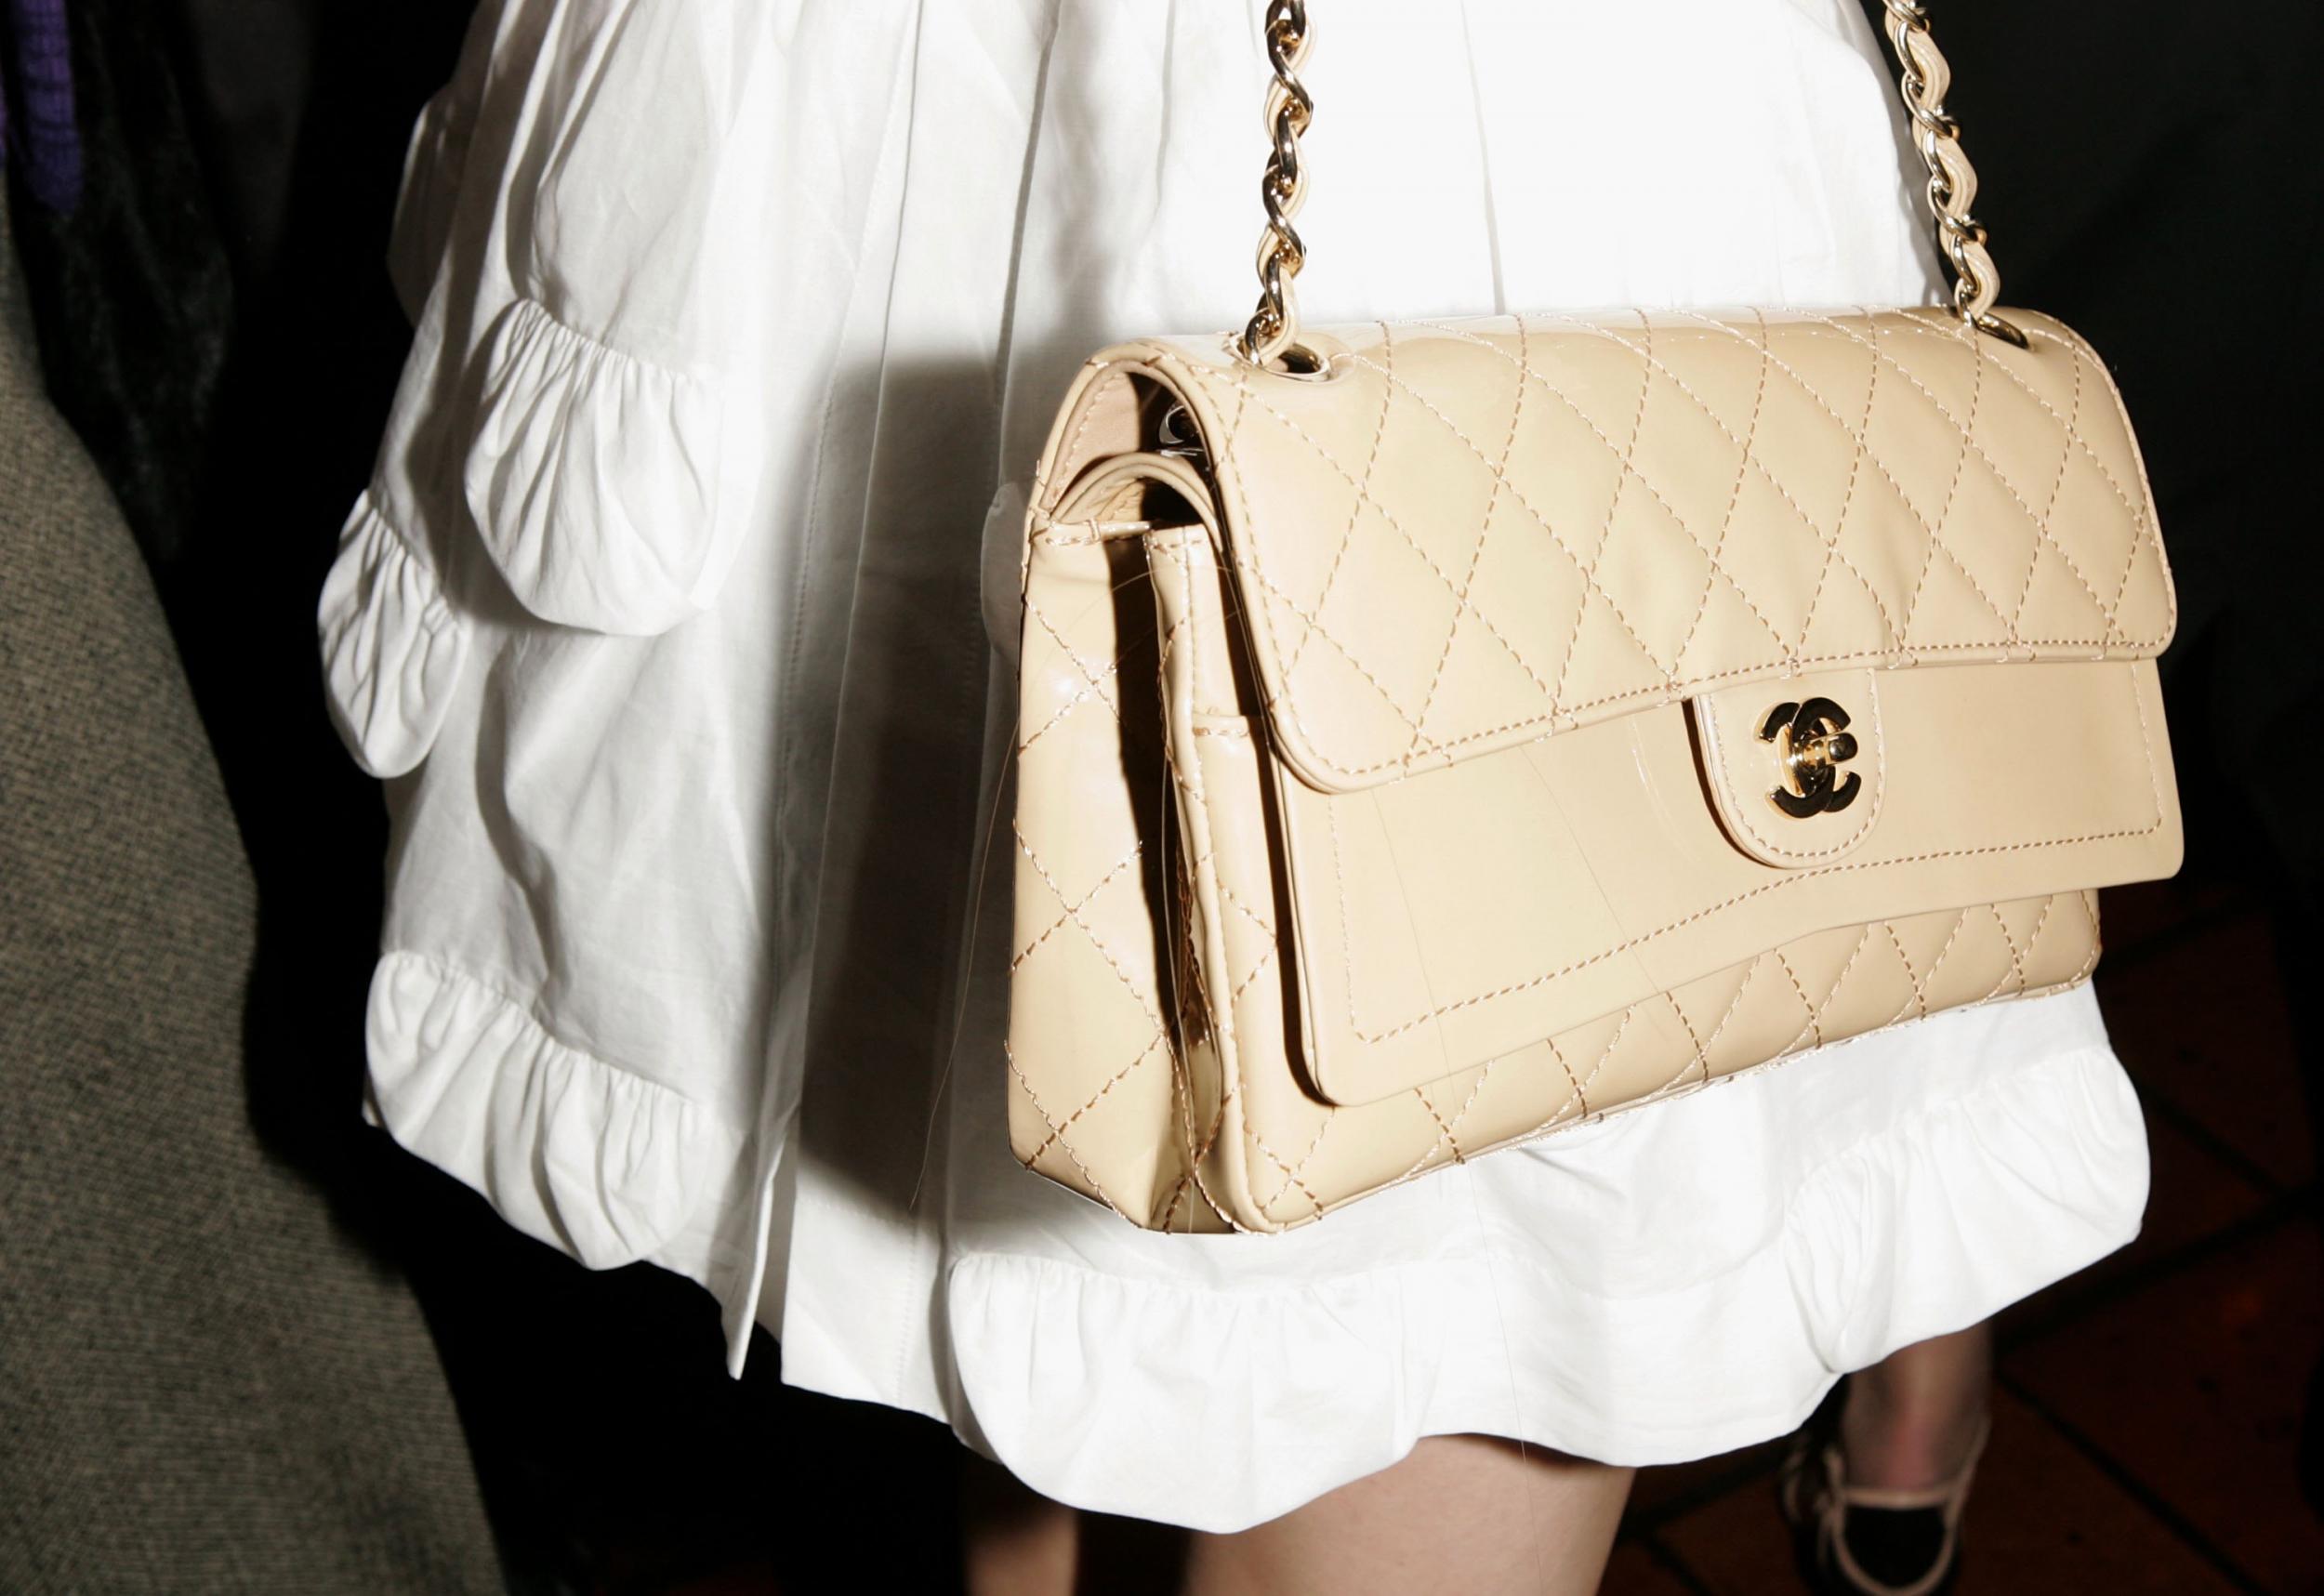 Chanel stops selling bags to Russians abroad who want to take them home